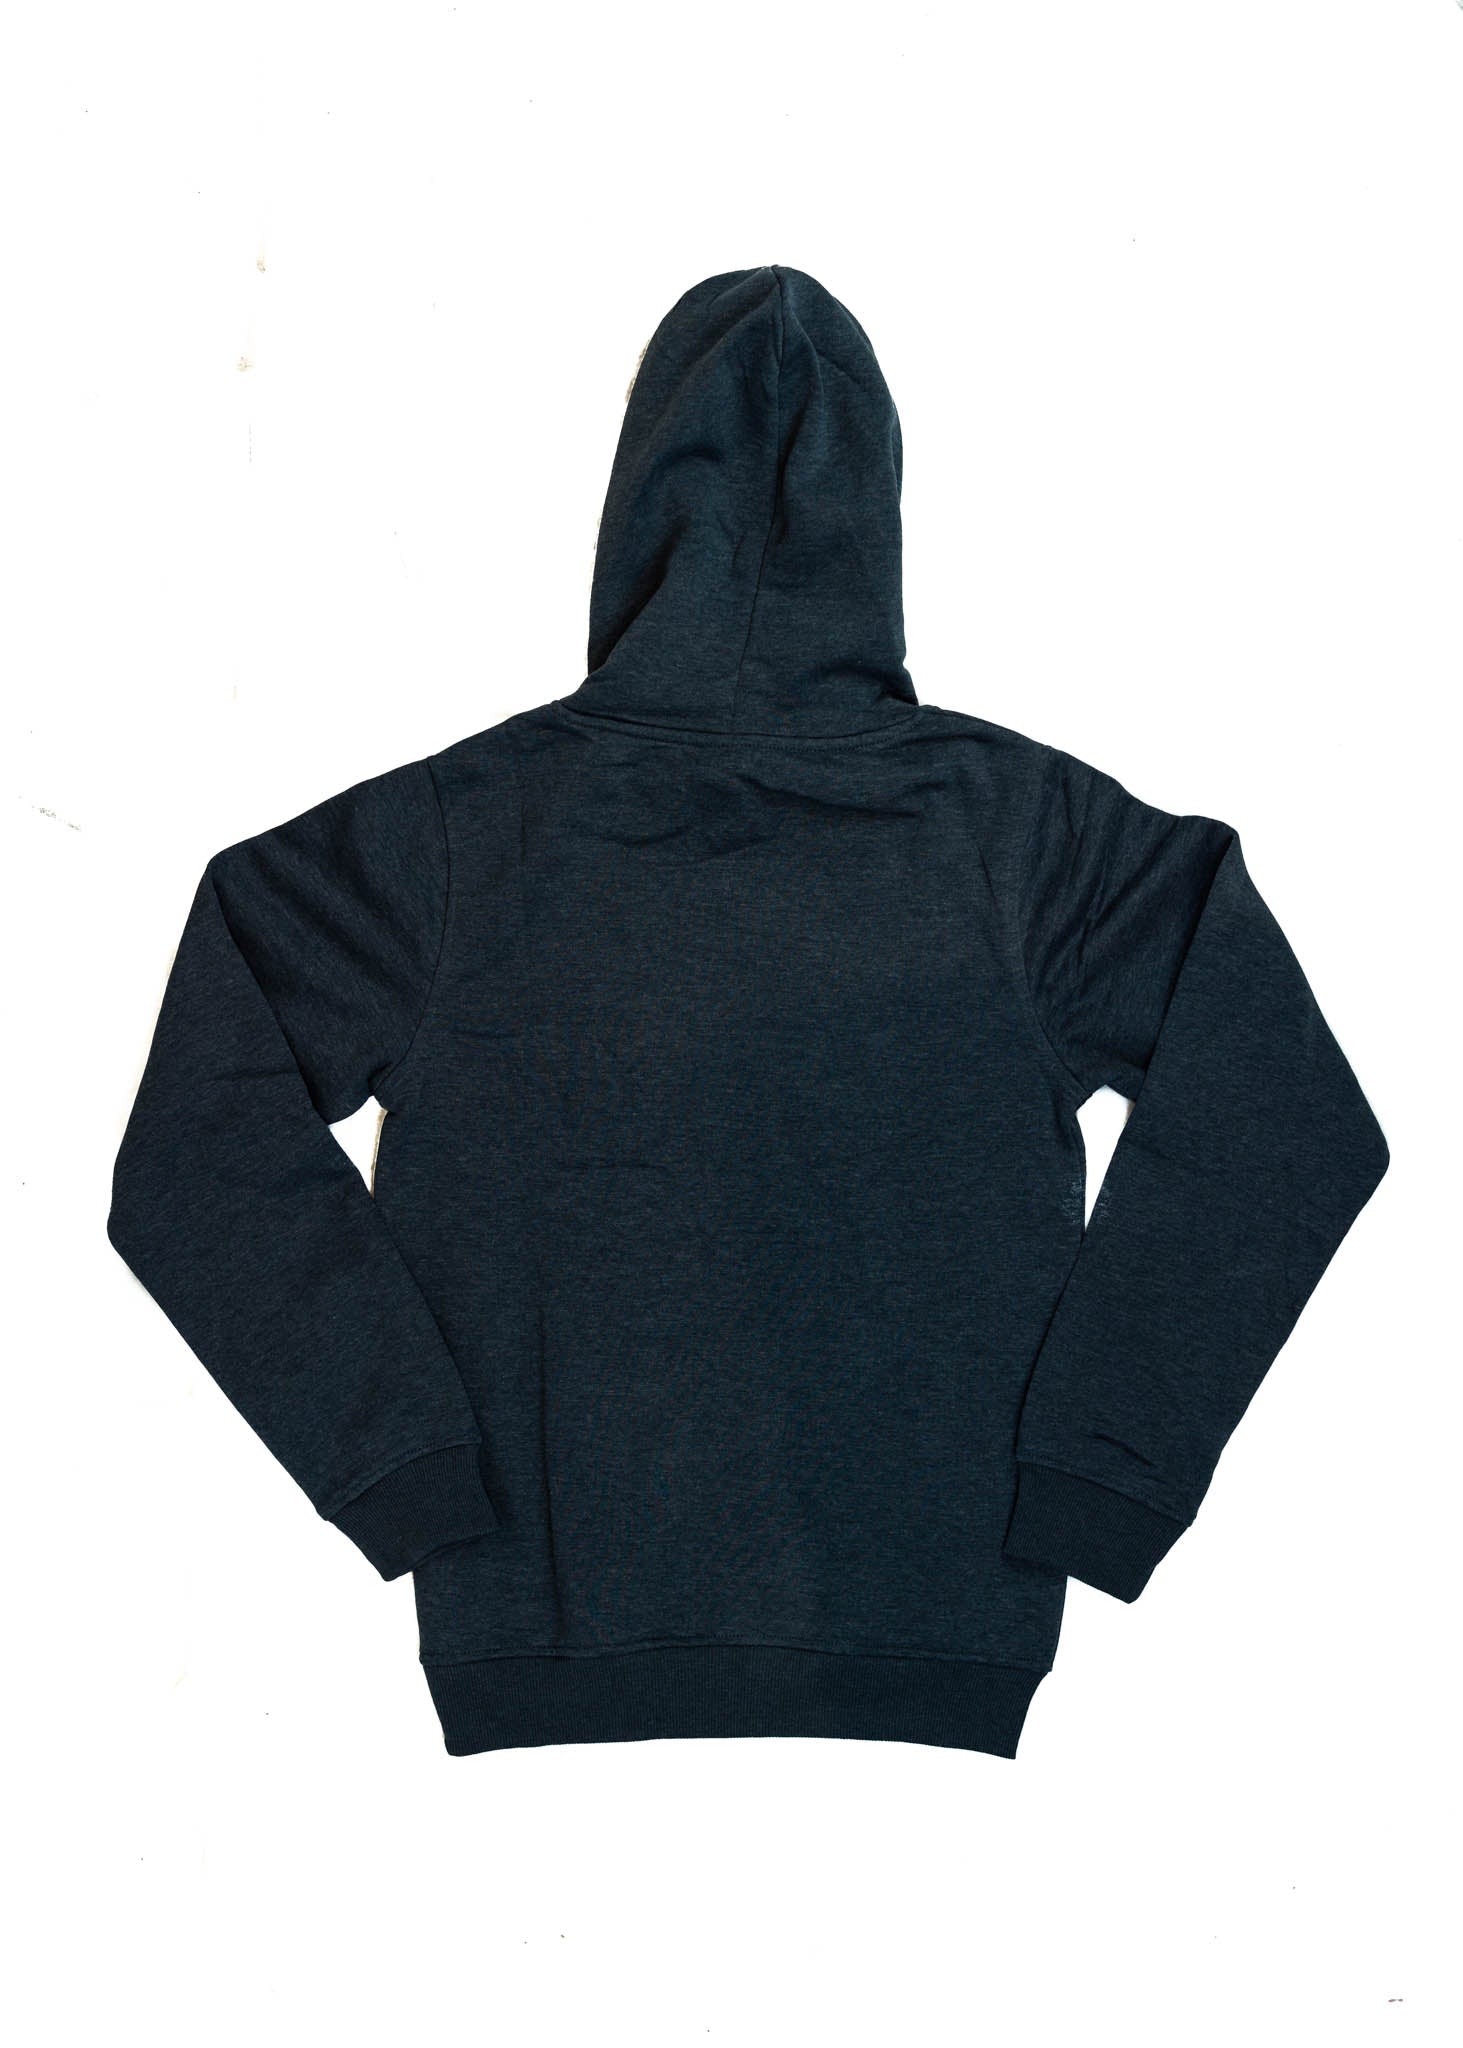 A navy blue unisex hoodie for men and women. Full size view of the back side of a dark blue sweater with a white, silver, and carbon fiber embroidered GT2 RS. Fabric composition is cotton, polyester, and rayon. The material is very soft, stretchy, and non-transparent. The style of this hoodie is long sleeve, crewneck with a hood, hooded, with embroidery on the left chest.